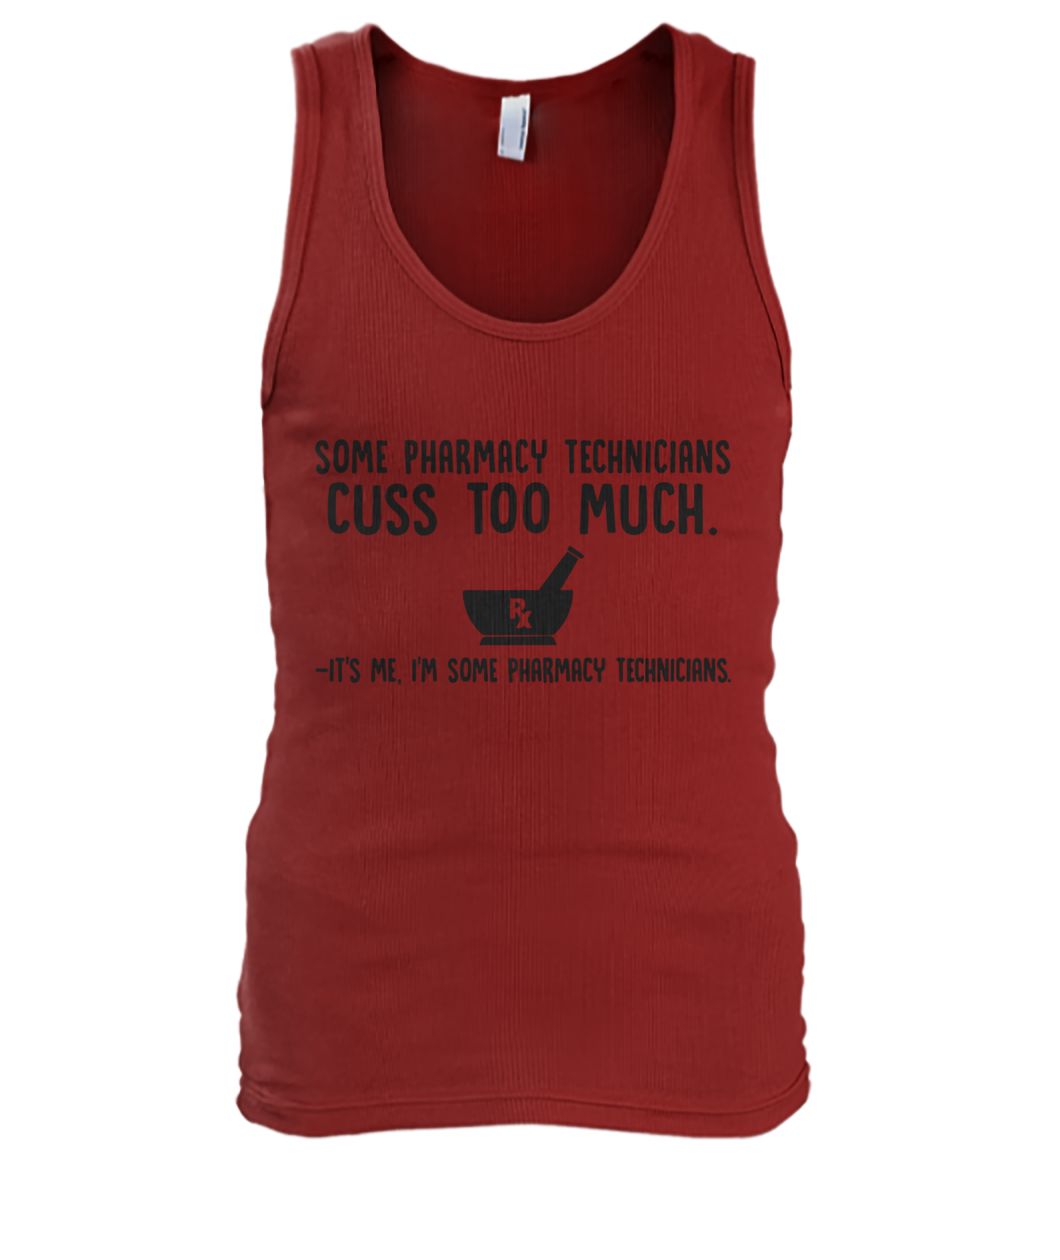 Some pharmacy technicians cuss too much it's me I'm some pharmacy technicians men's tank top